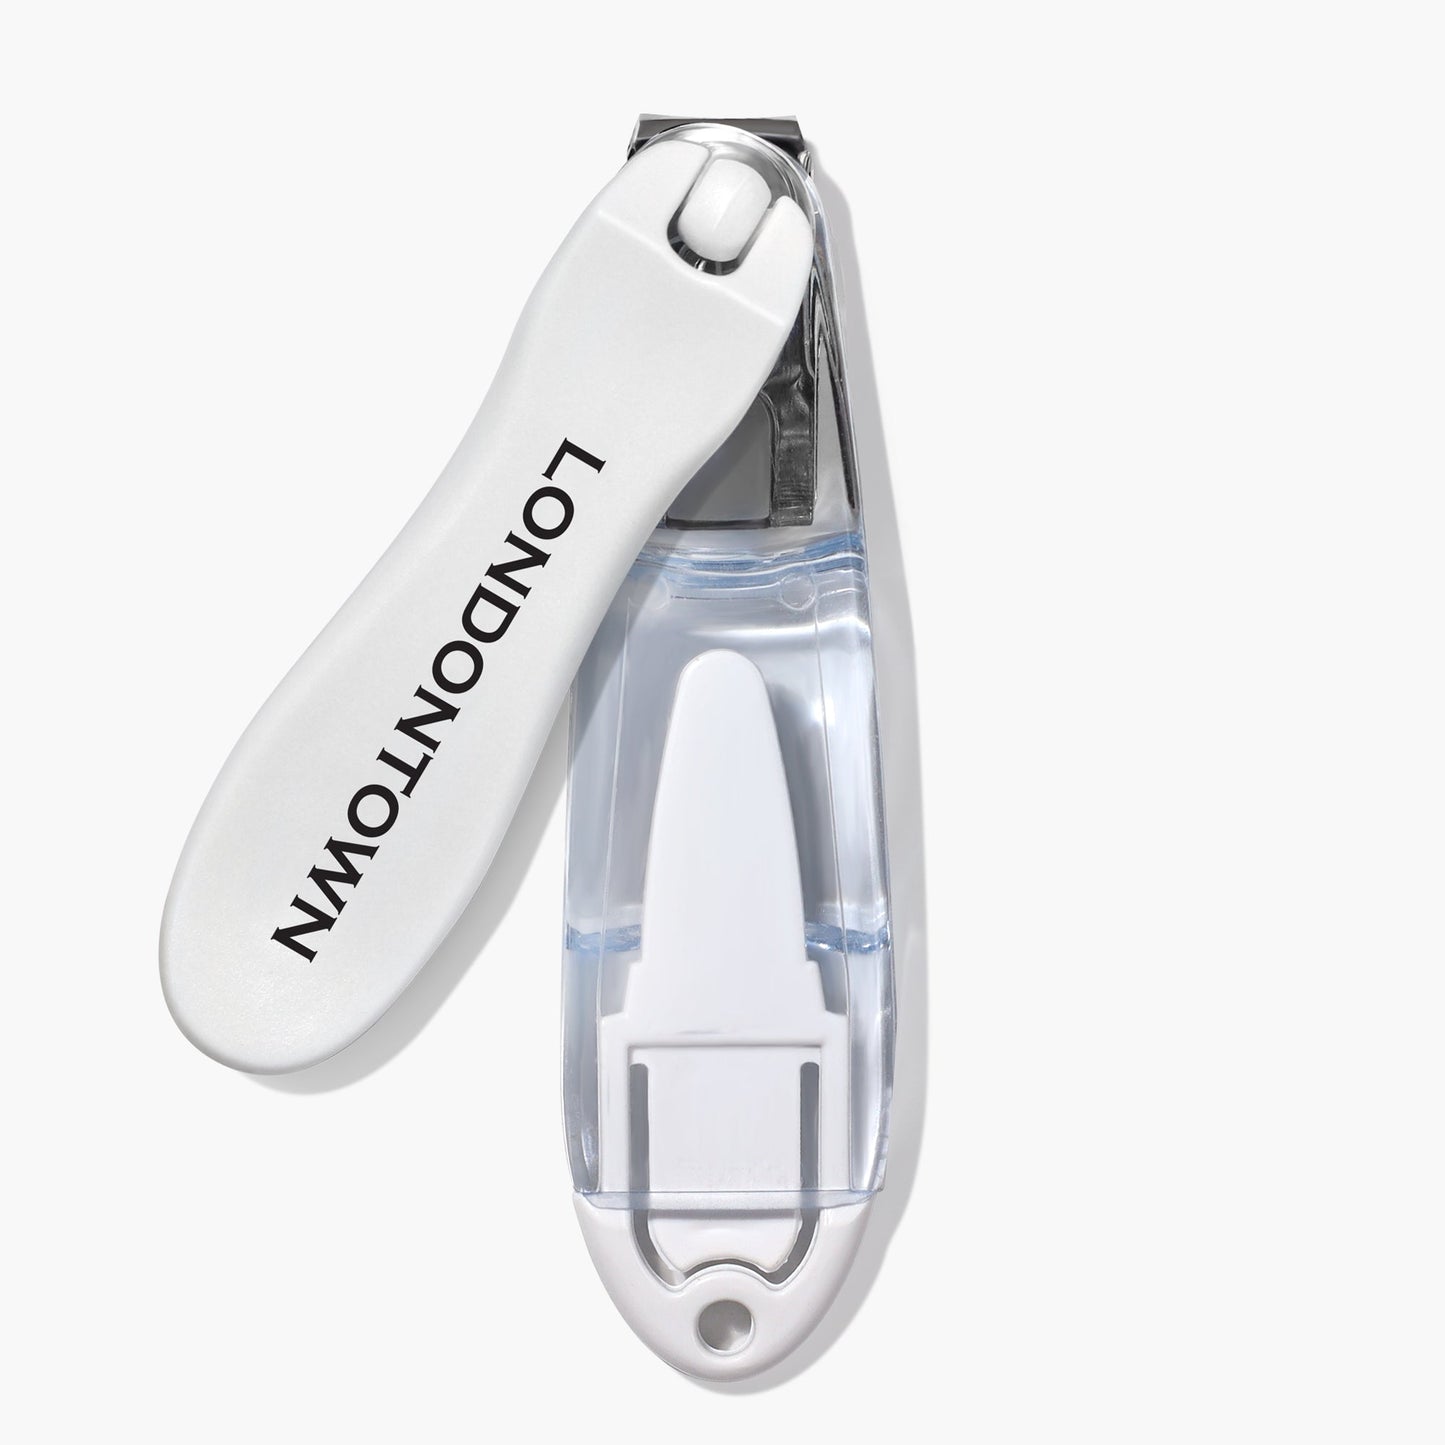 Flex Cut Nail Clippers by LONDONTOWN